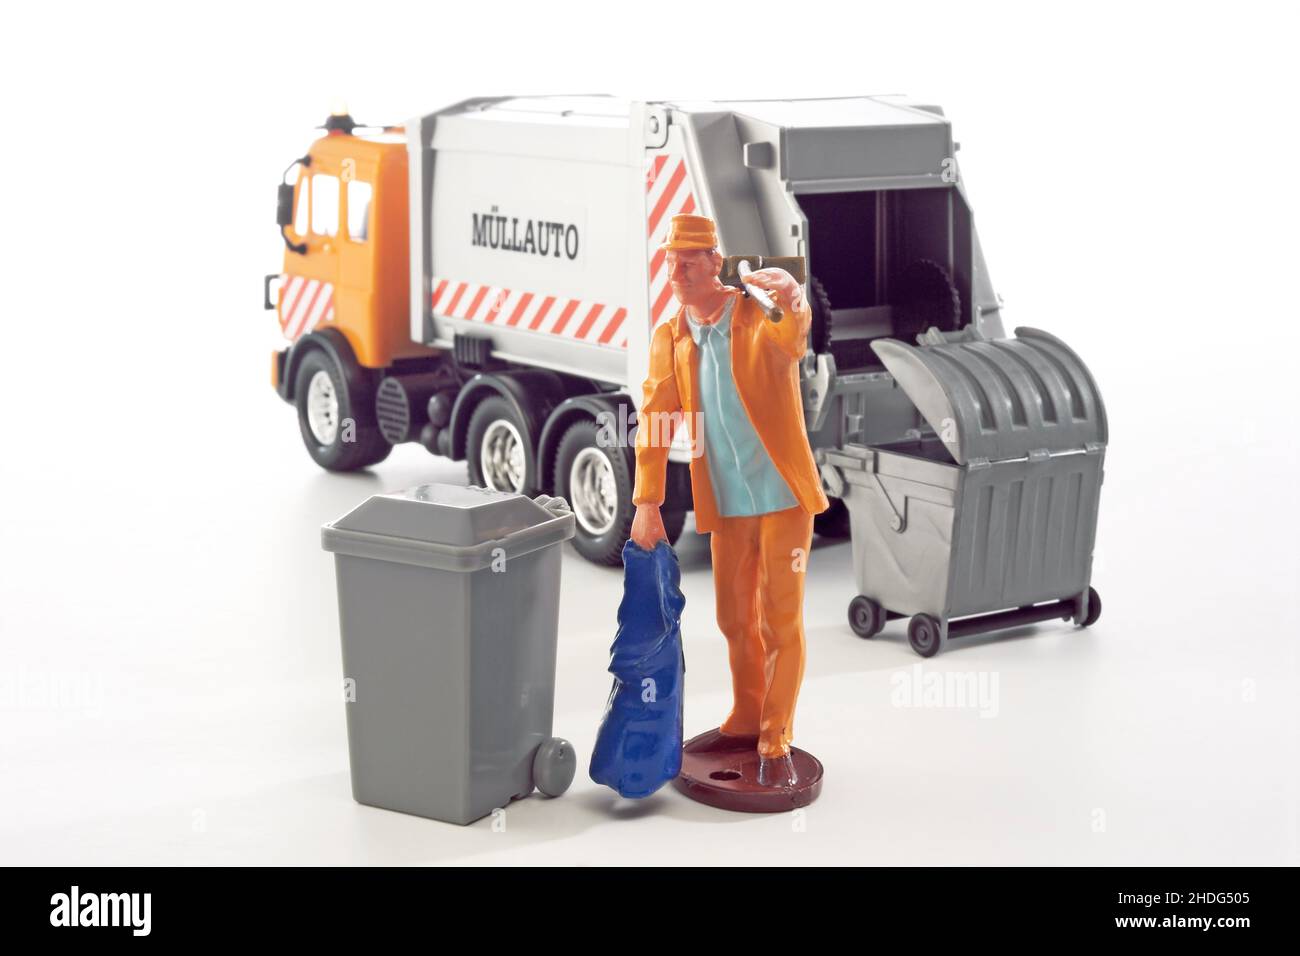 refuse collection, refuse collector, garbage, garbage collection, refuse collections, sanitation worker Stock Photo